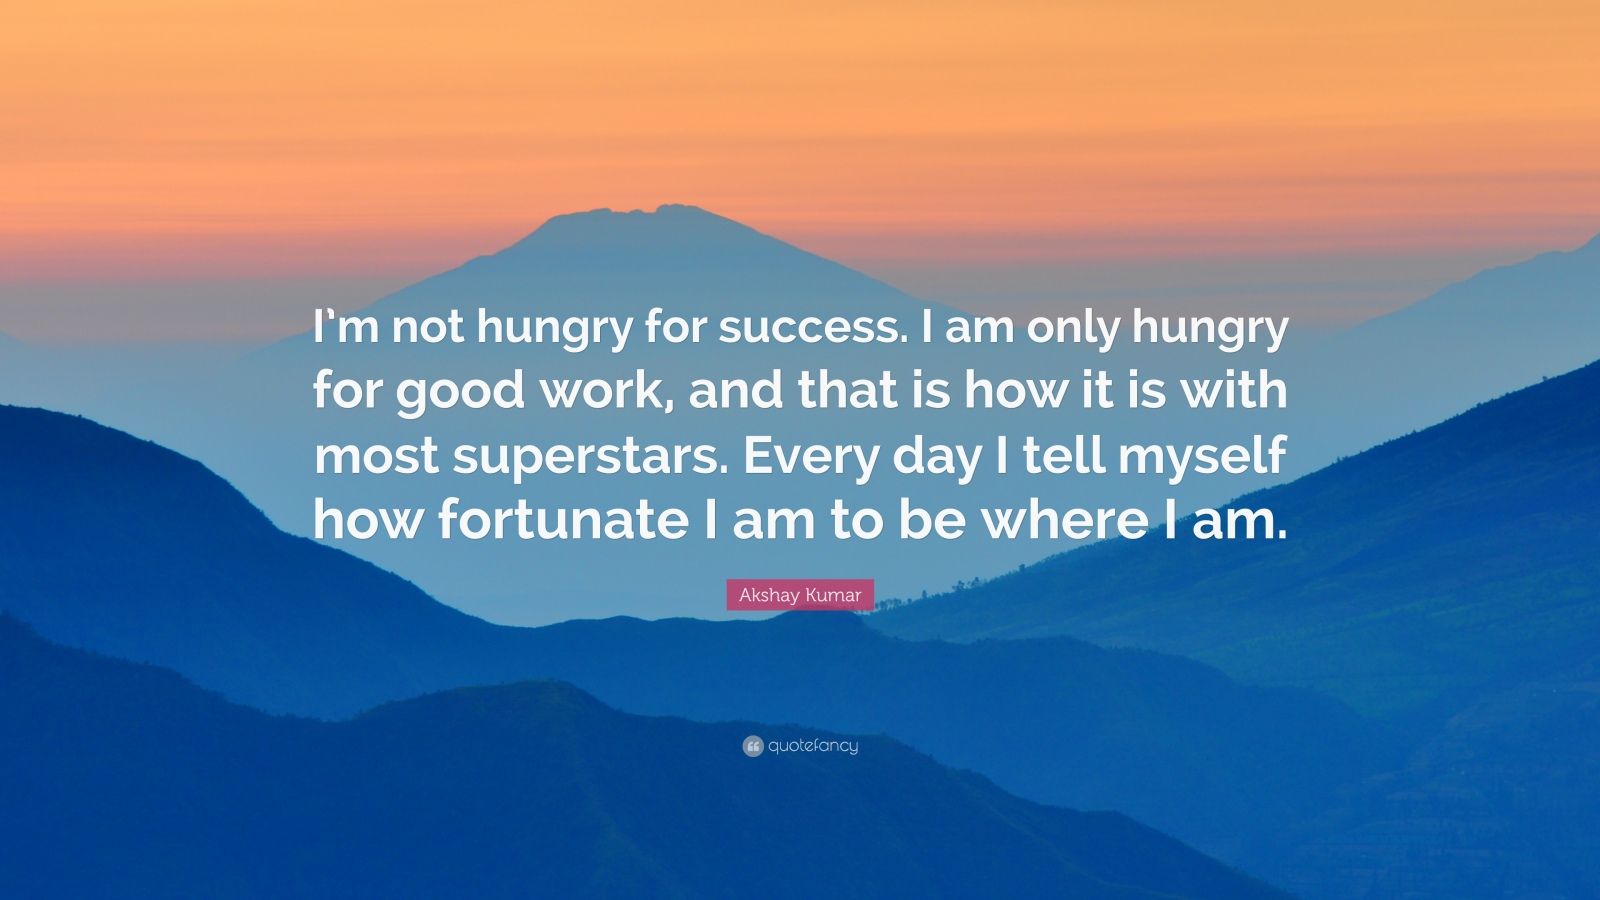 Akshay Kumar Quote: “I’m not hungry for success. I am only hungry for ...